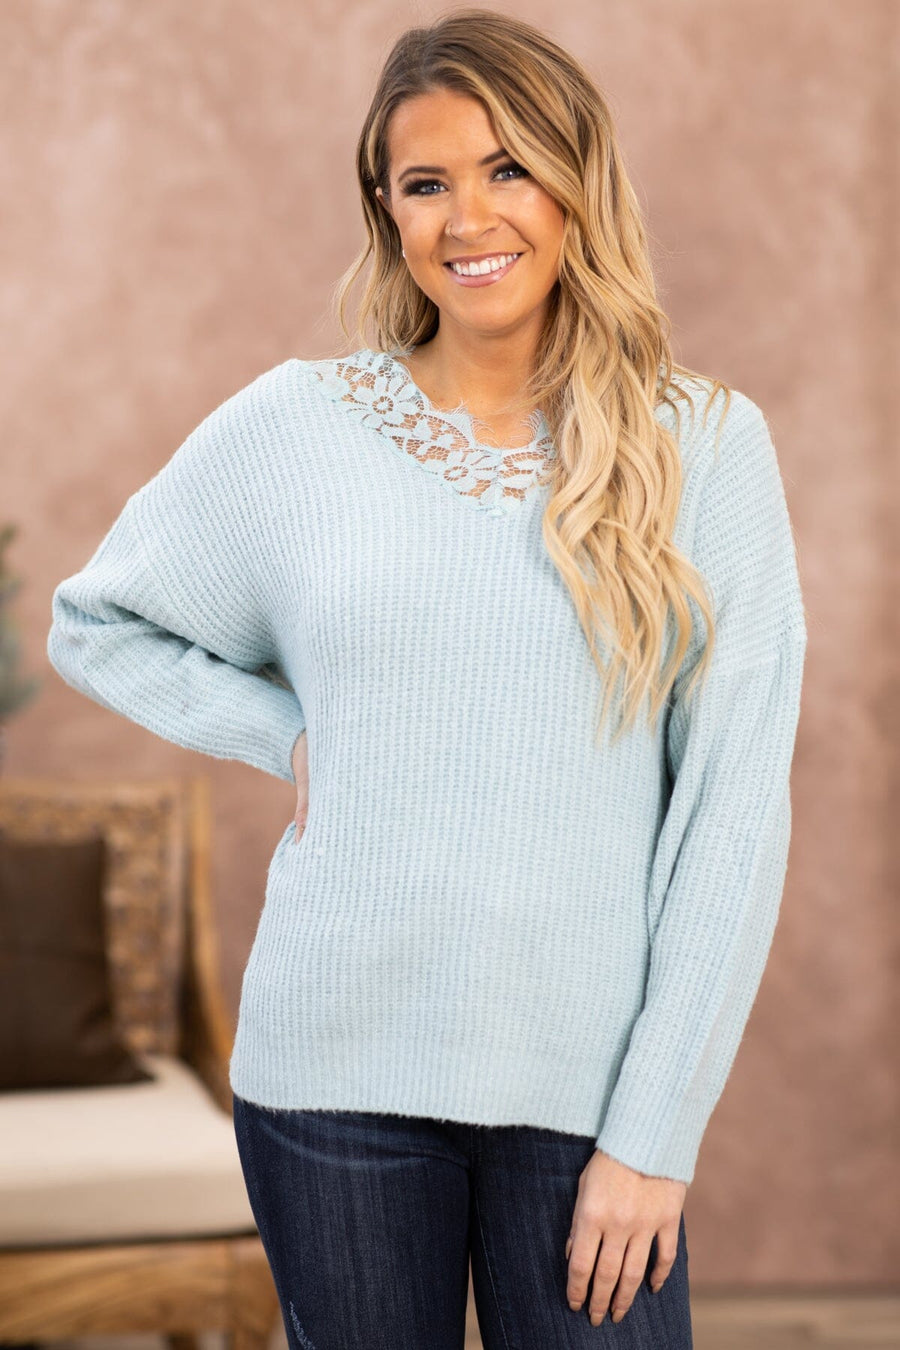 Baby Blue Lace Trim Rib Knit Sweater - Filly Flair